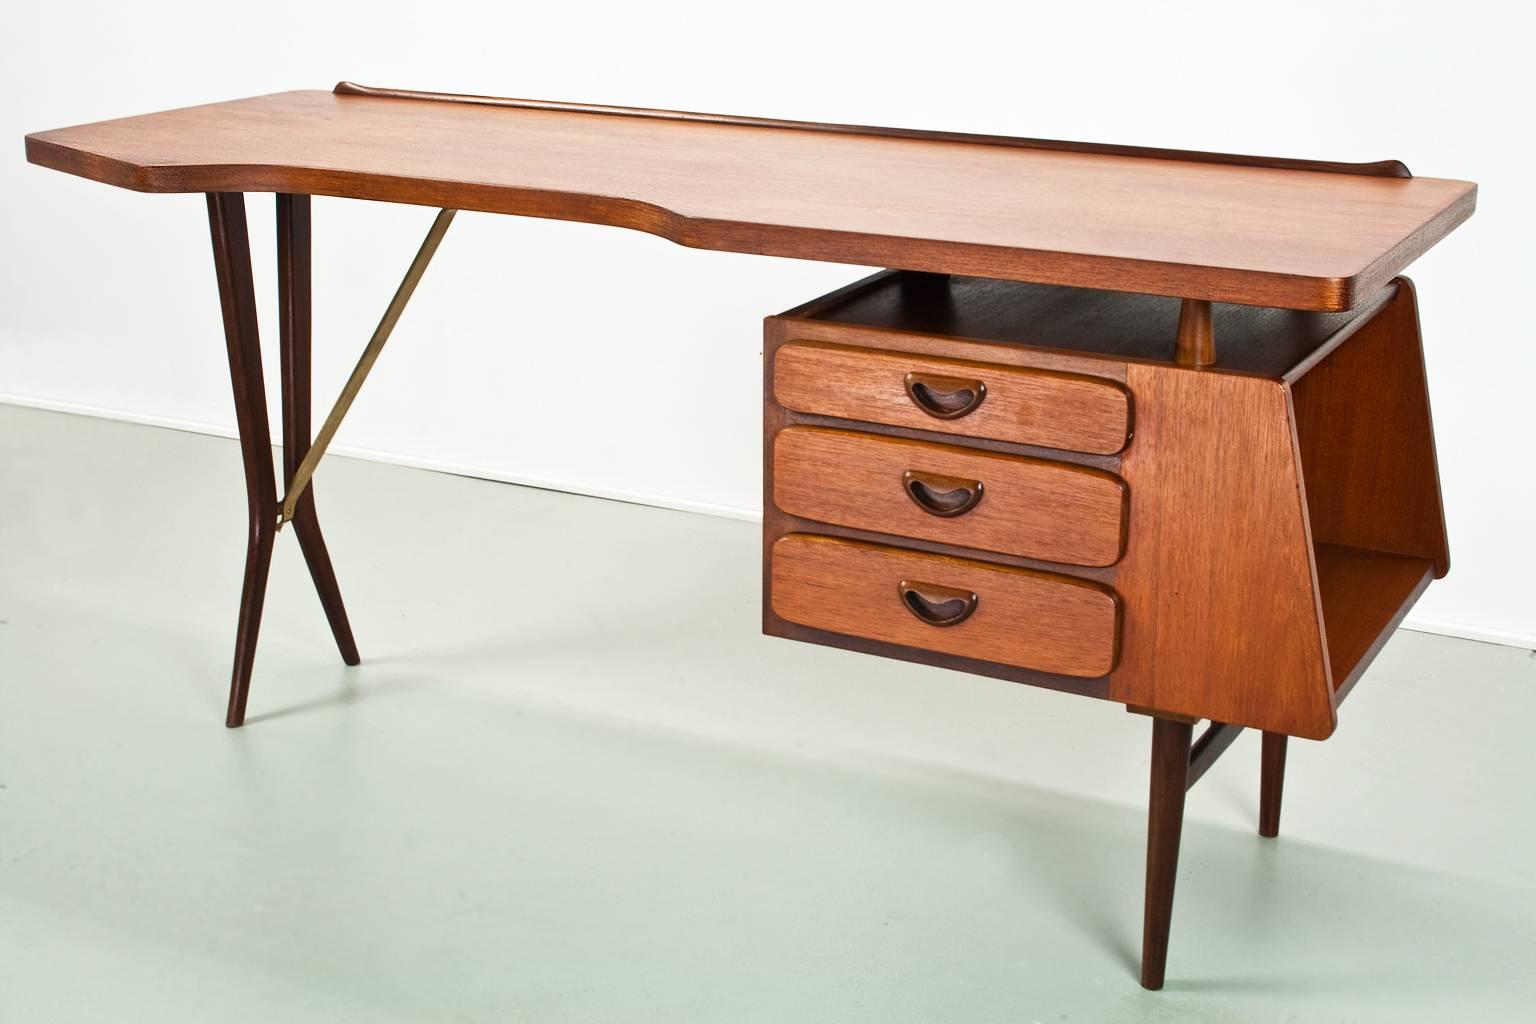 Original and fully restored iconic Mid-Century Modern desk with floating tabletop and brass detailed arm on the black lacquered wooden legs. In absolutely excellent condition. 
Writers desk designed by Louis Van Teeffelen in the 1950s for WéBé